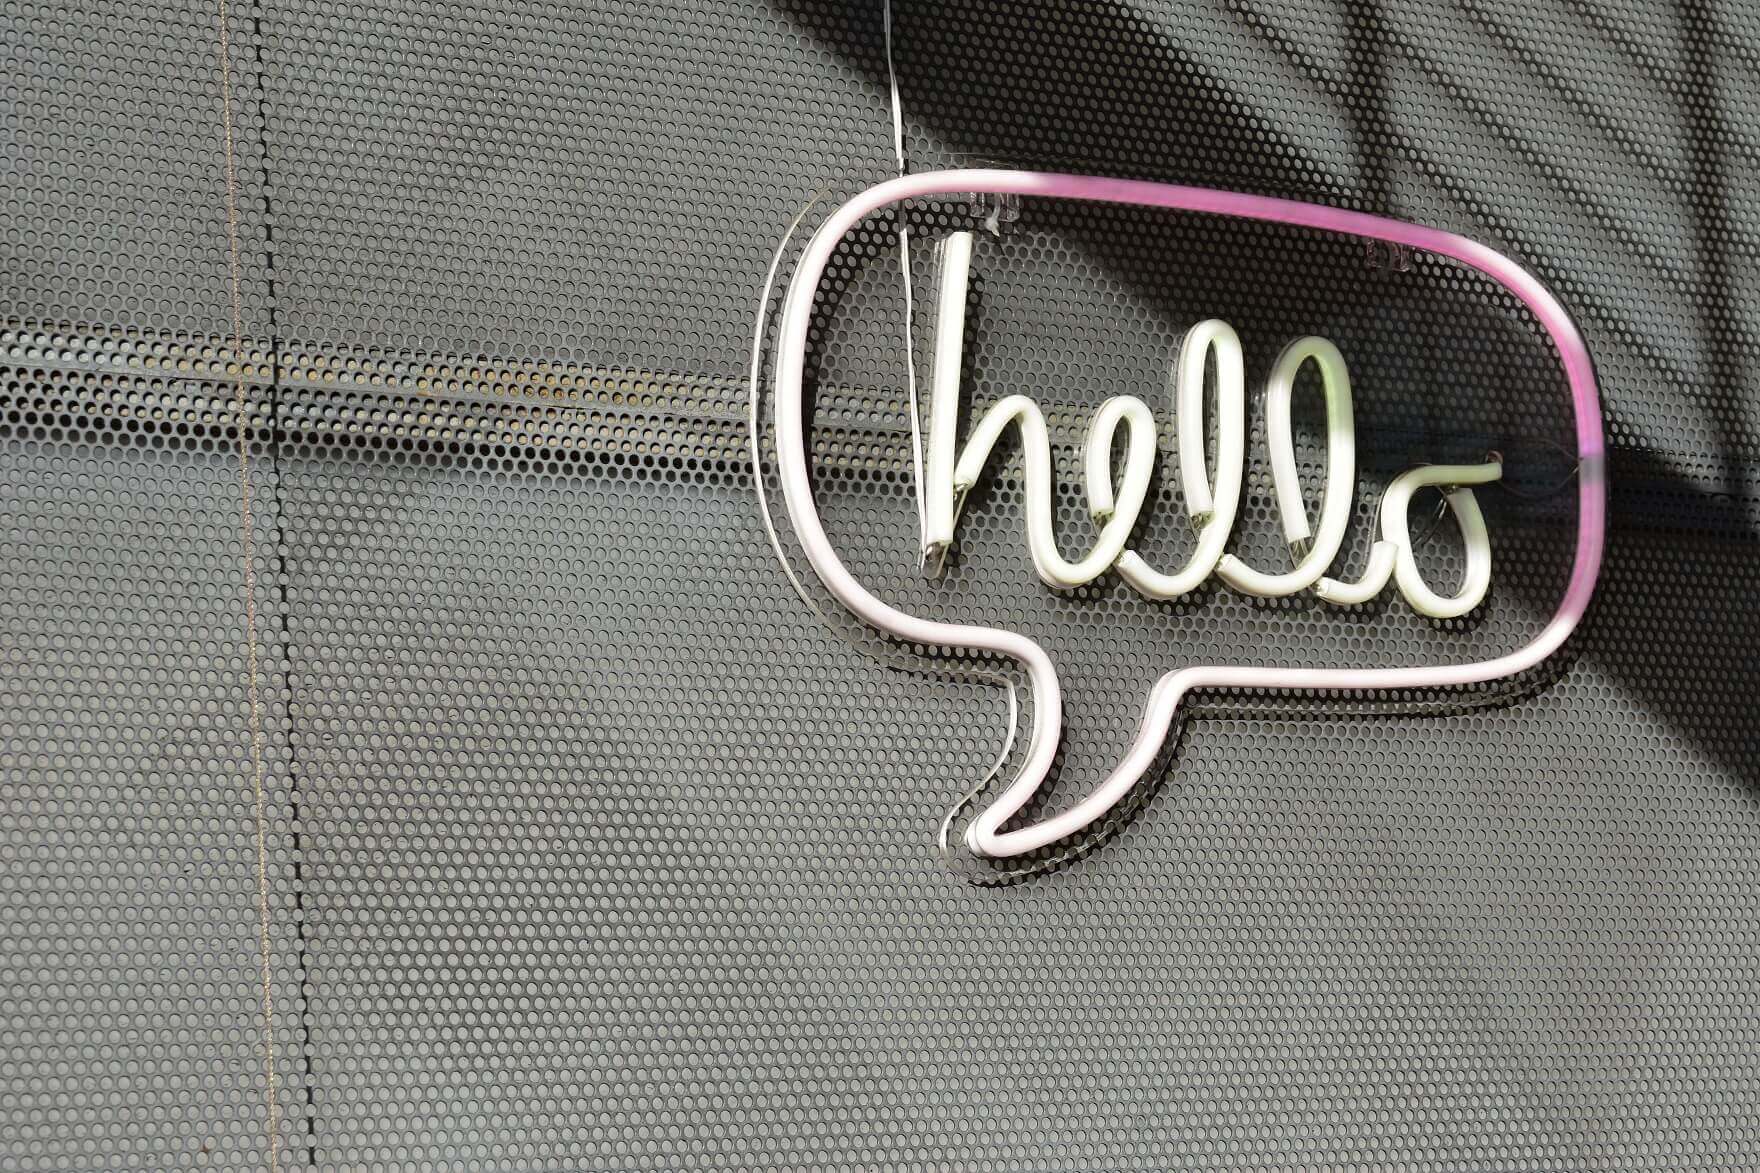 Image showing a "hello" message.